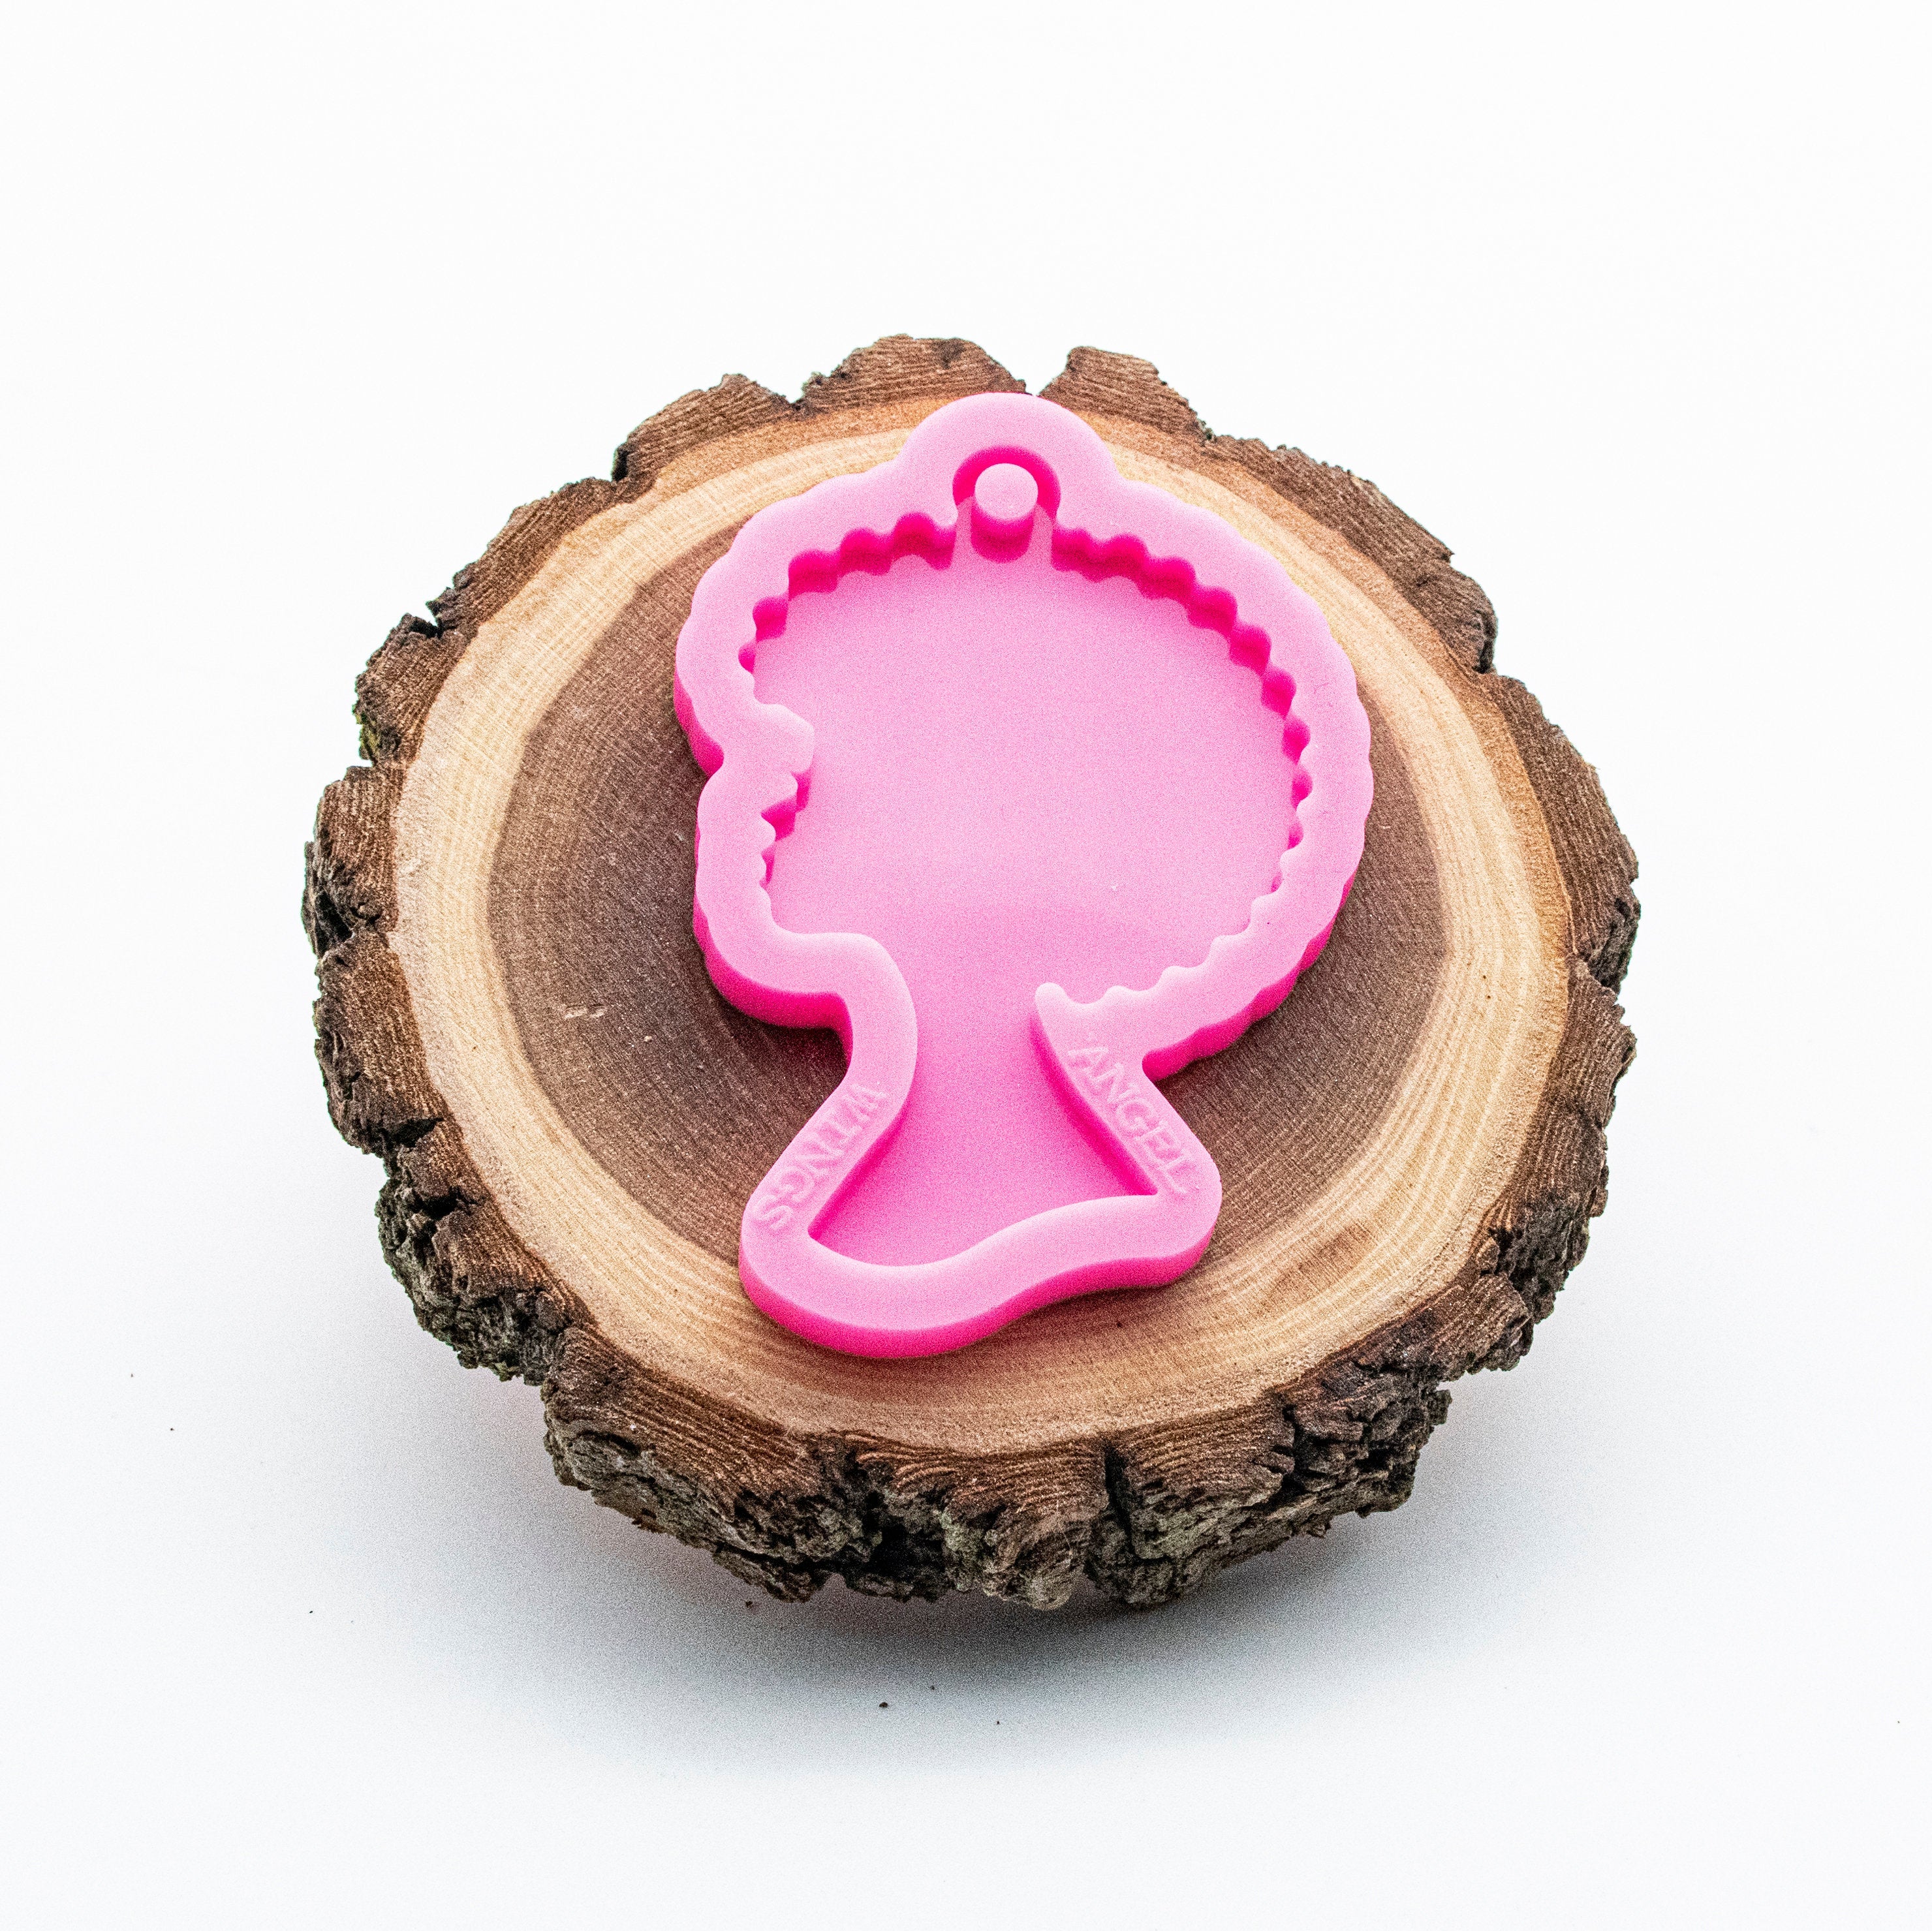 Woman Silhouette Shiny Silicone Mold for Epoxy Resin Keychain - Jewelry Making - Ornament Silicone Mold